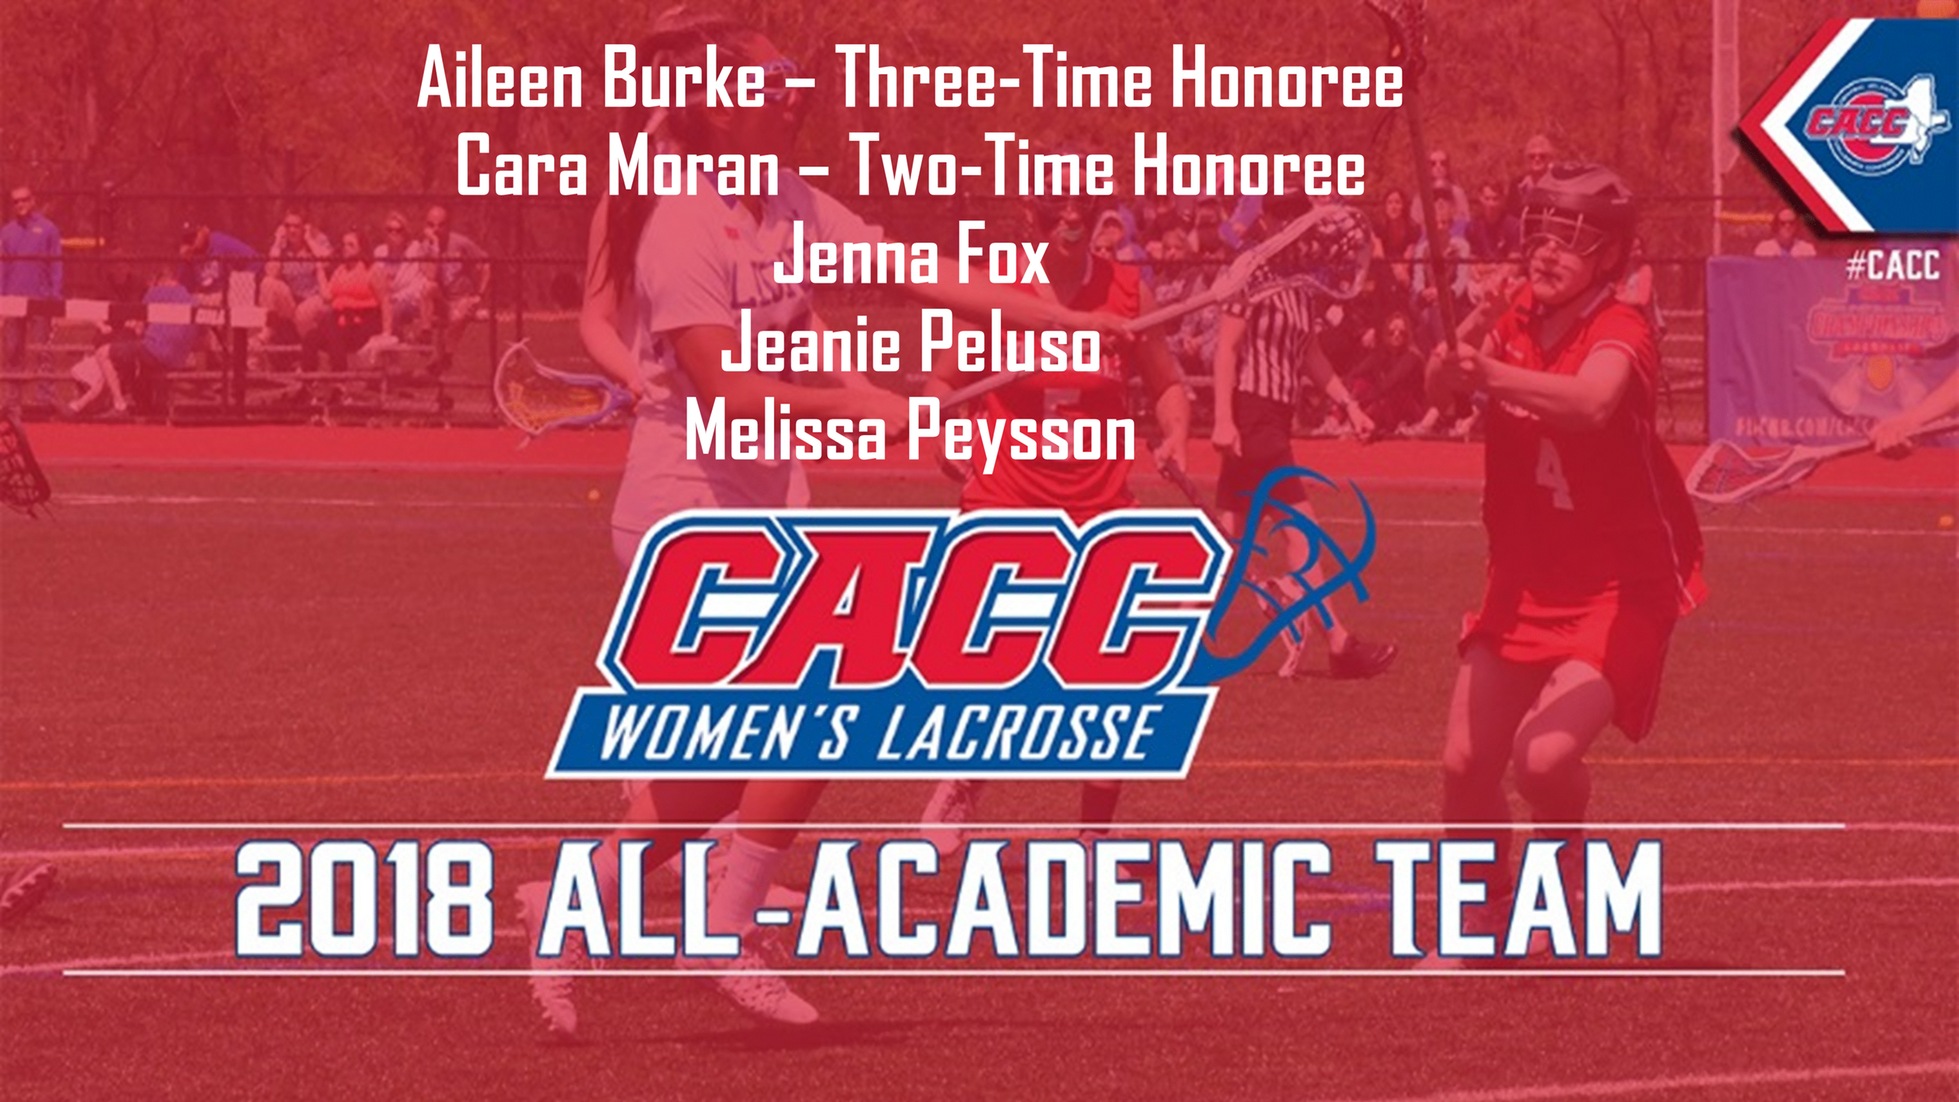 The CACC released the 2018 Women's Lacrosse All-Academic Team.